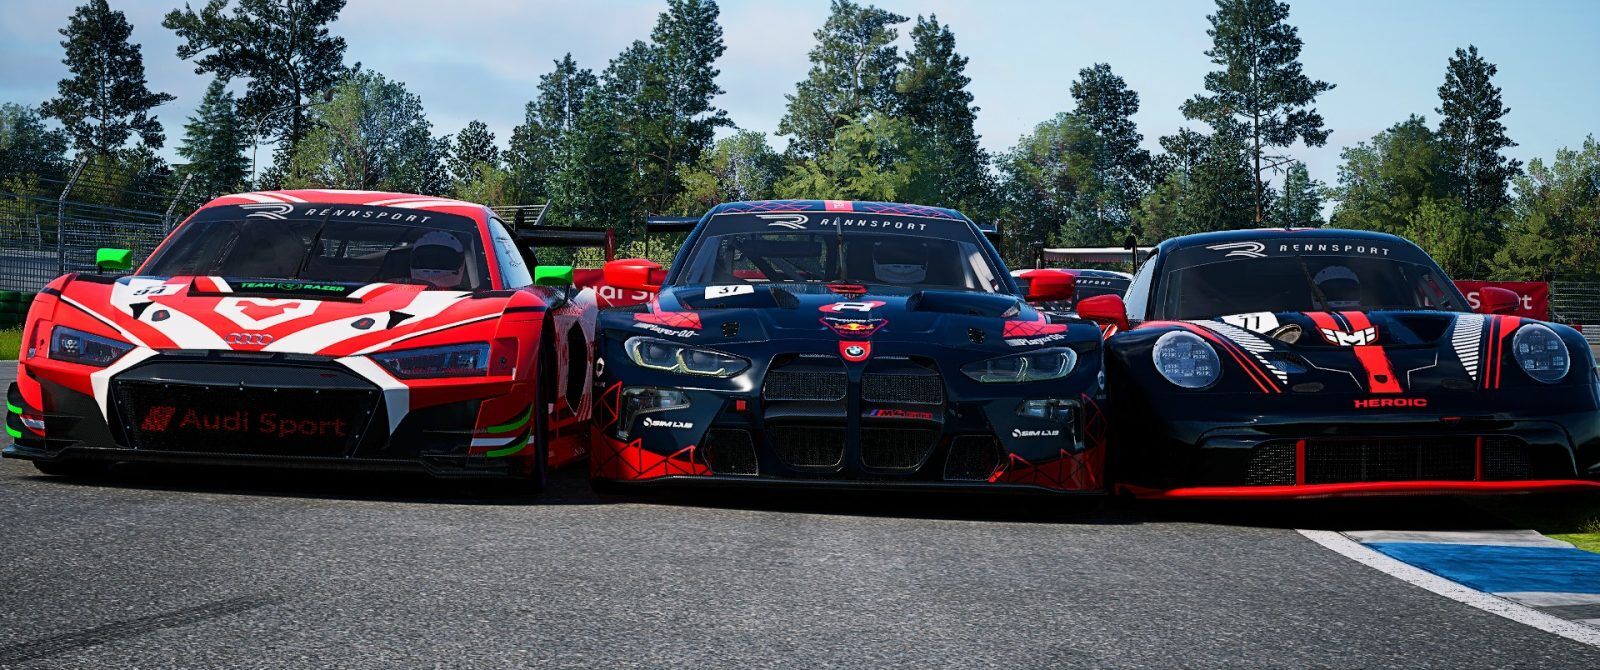 Three cars. On the left, a red and white Audi R8 GT3, in the middle, a BMW M4 GT3 in an ultra dark blue and red colour scheme, on the right a Porsche 911 GT3 in a black, white and orange livery.